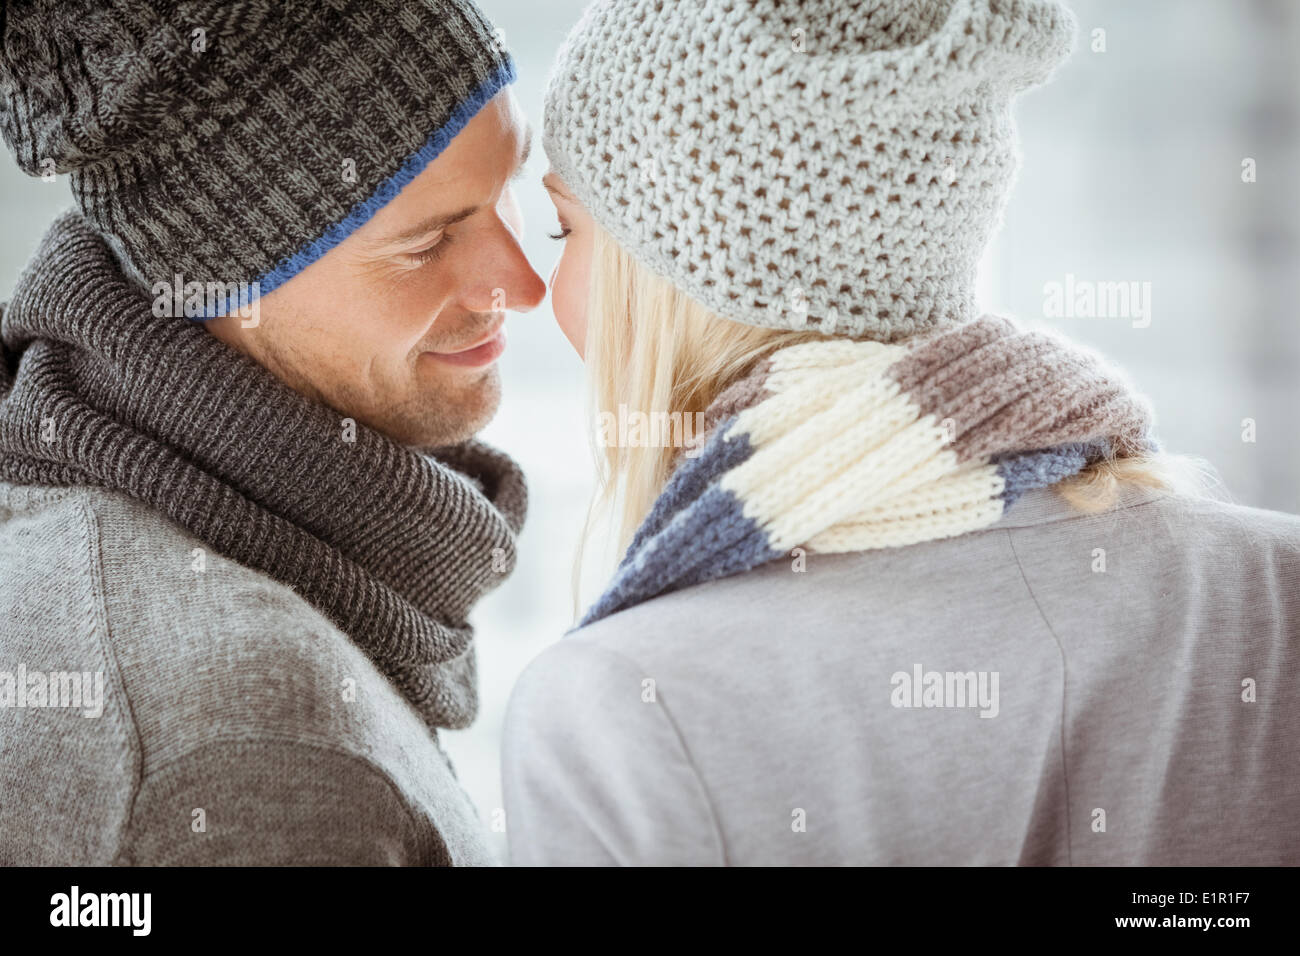 Couple in warm clothing facing each other Stock Photo